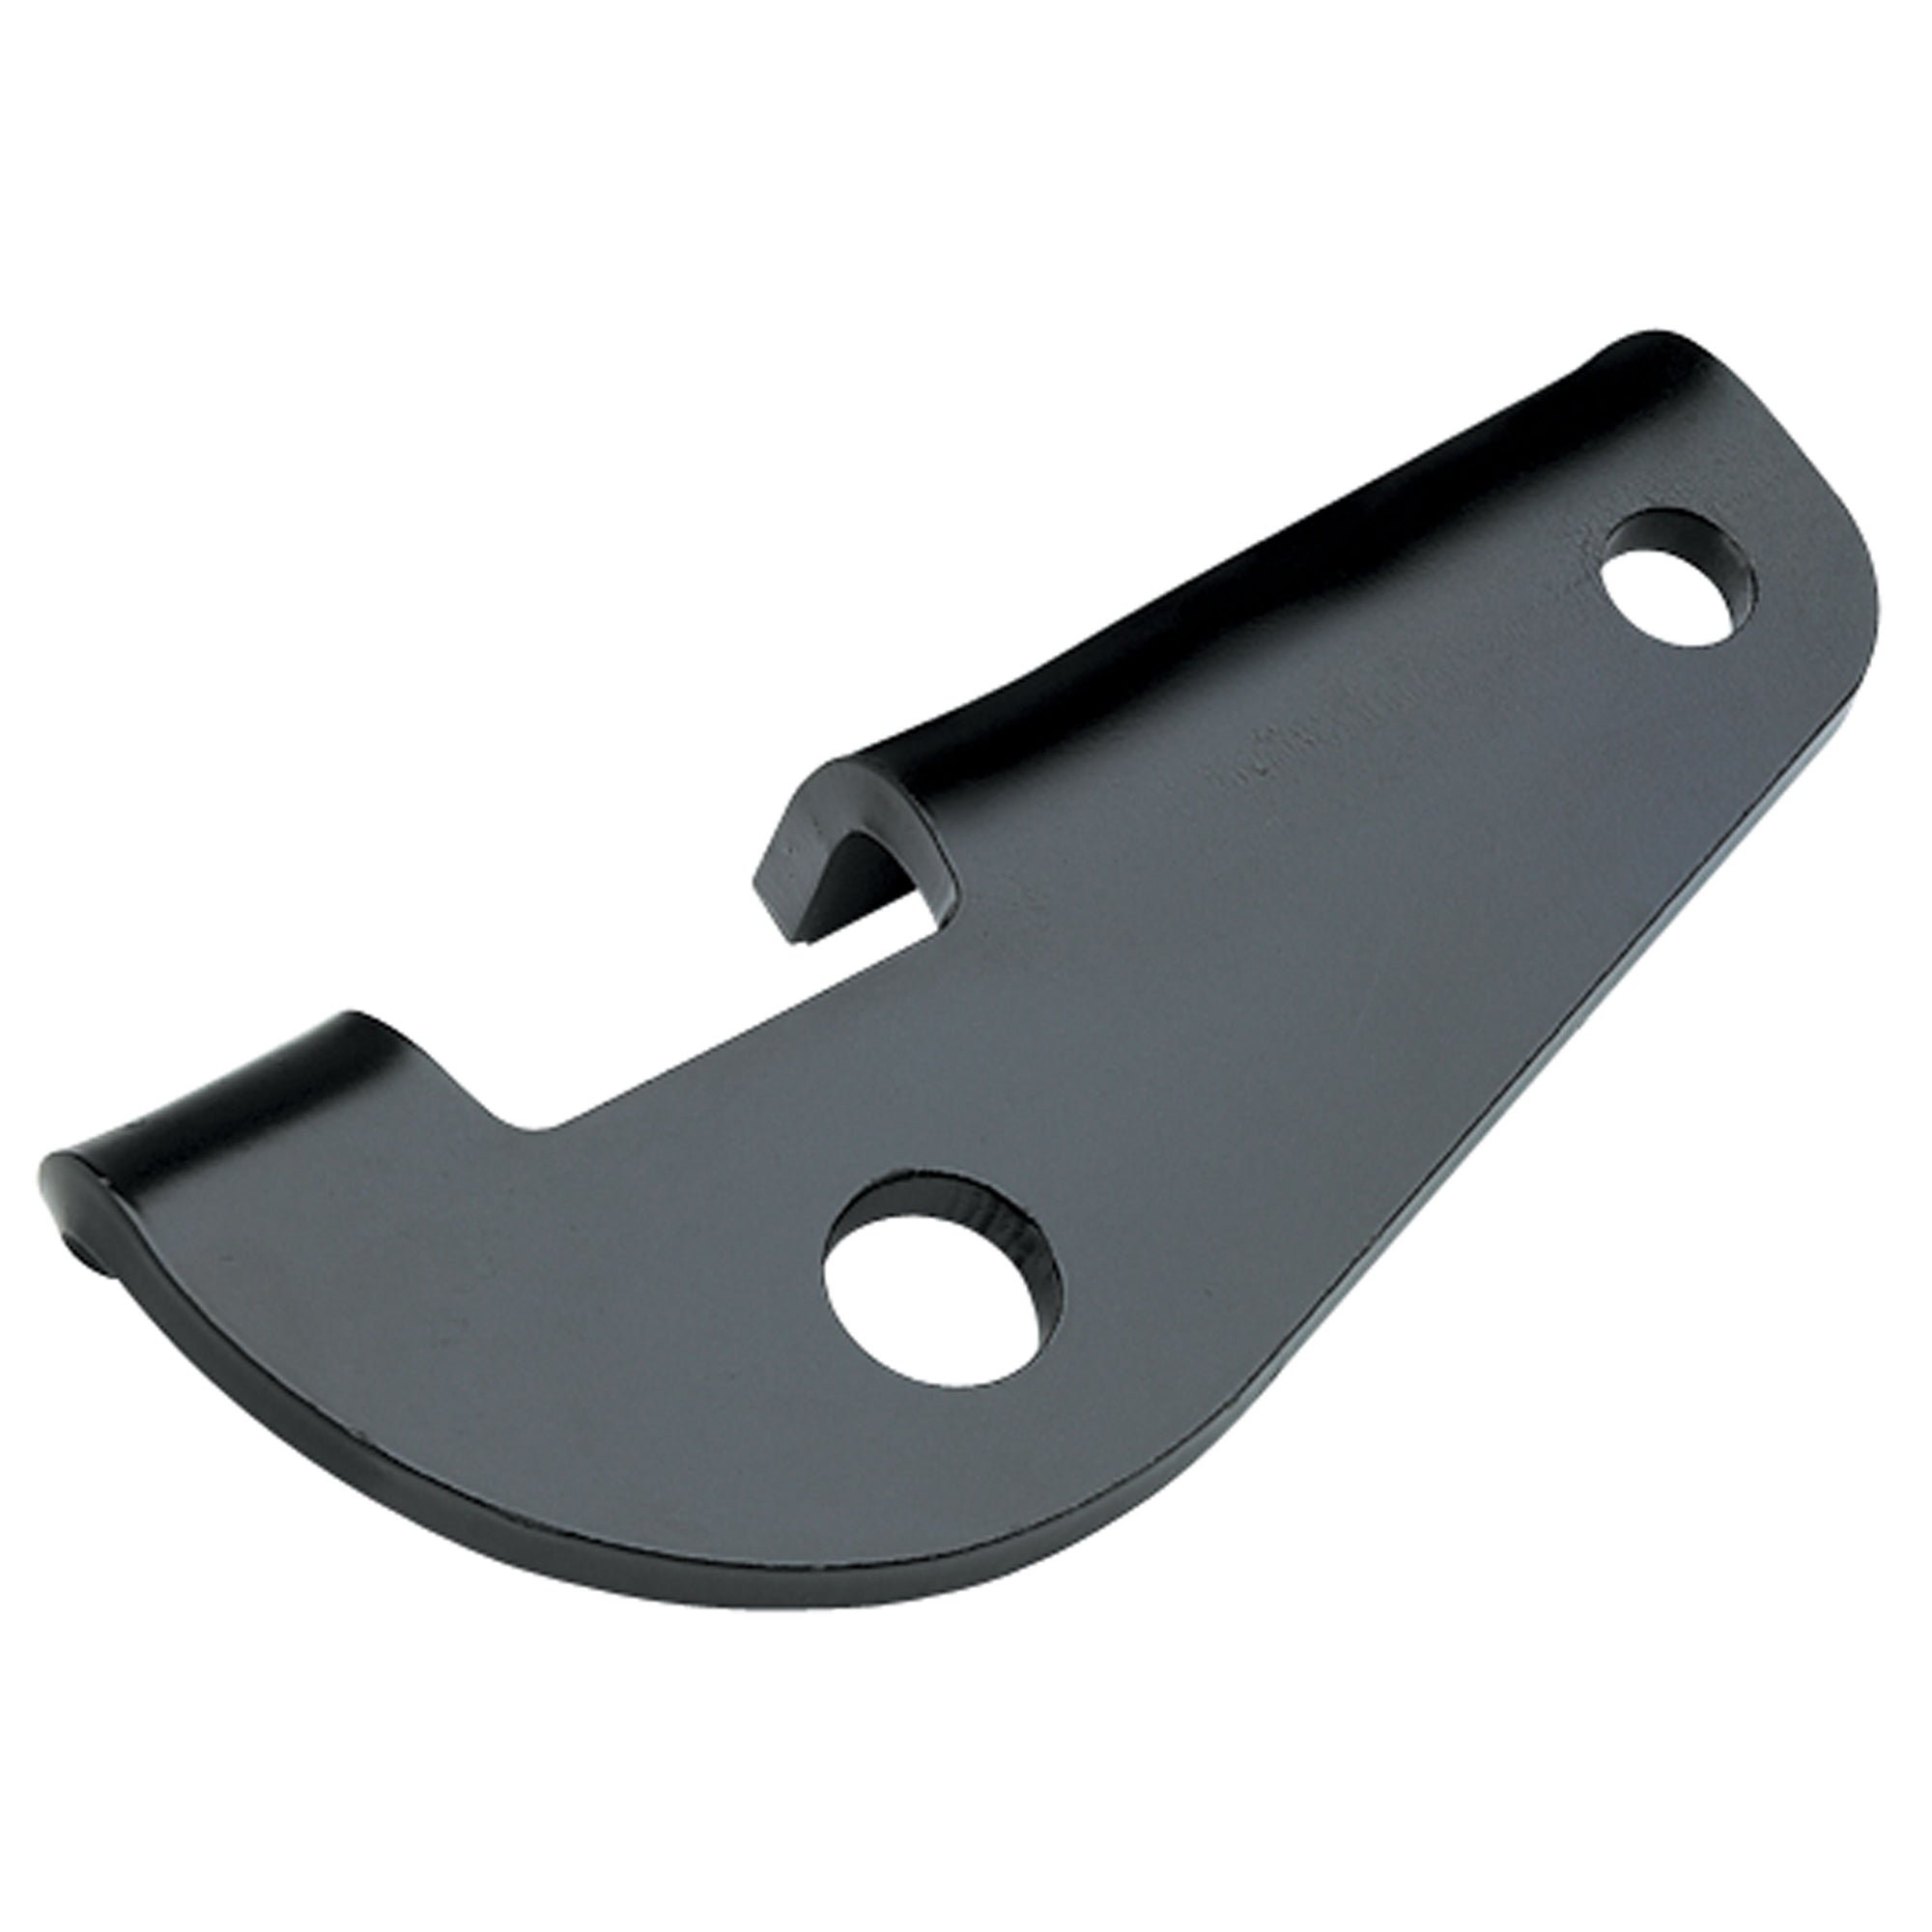 Reese 26003 Bolt-On Sway Control Adapter Bracket for 2" Ball Mount